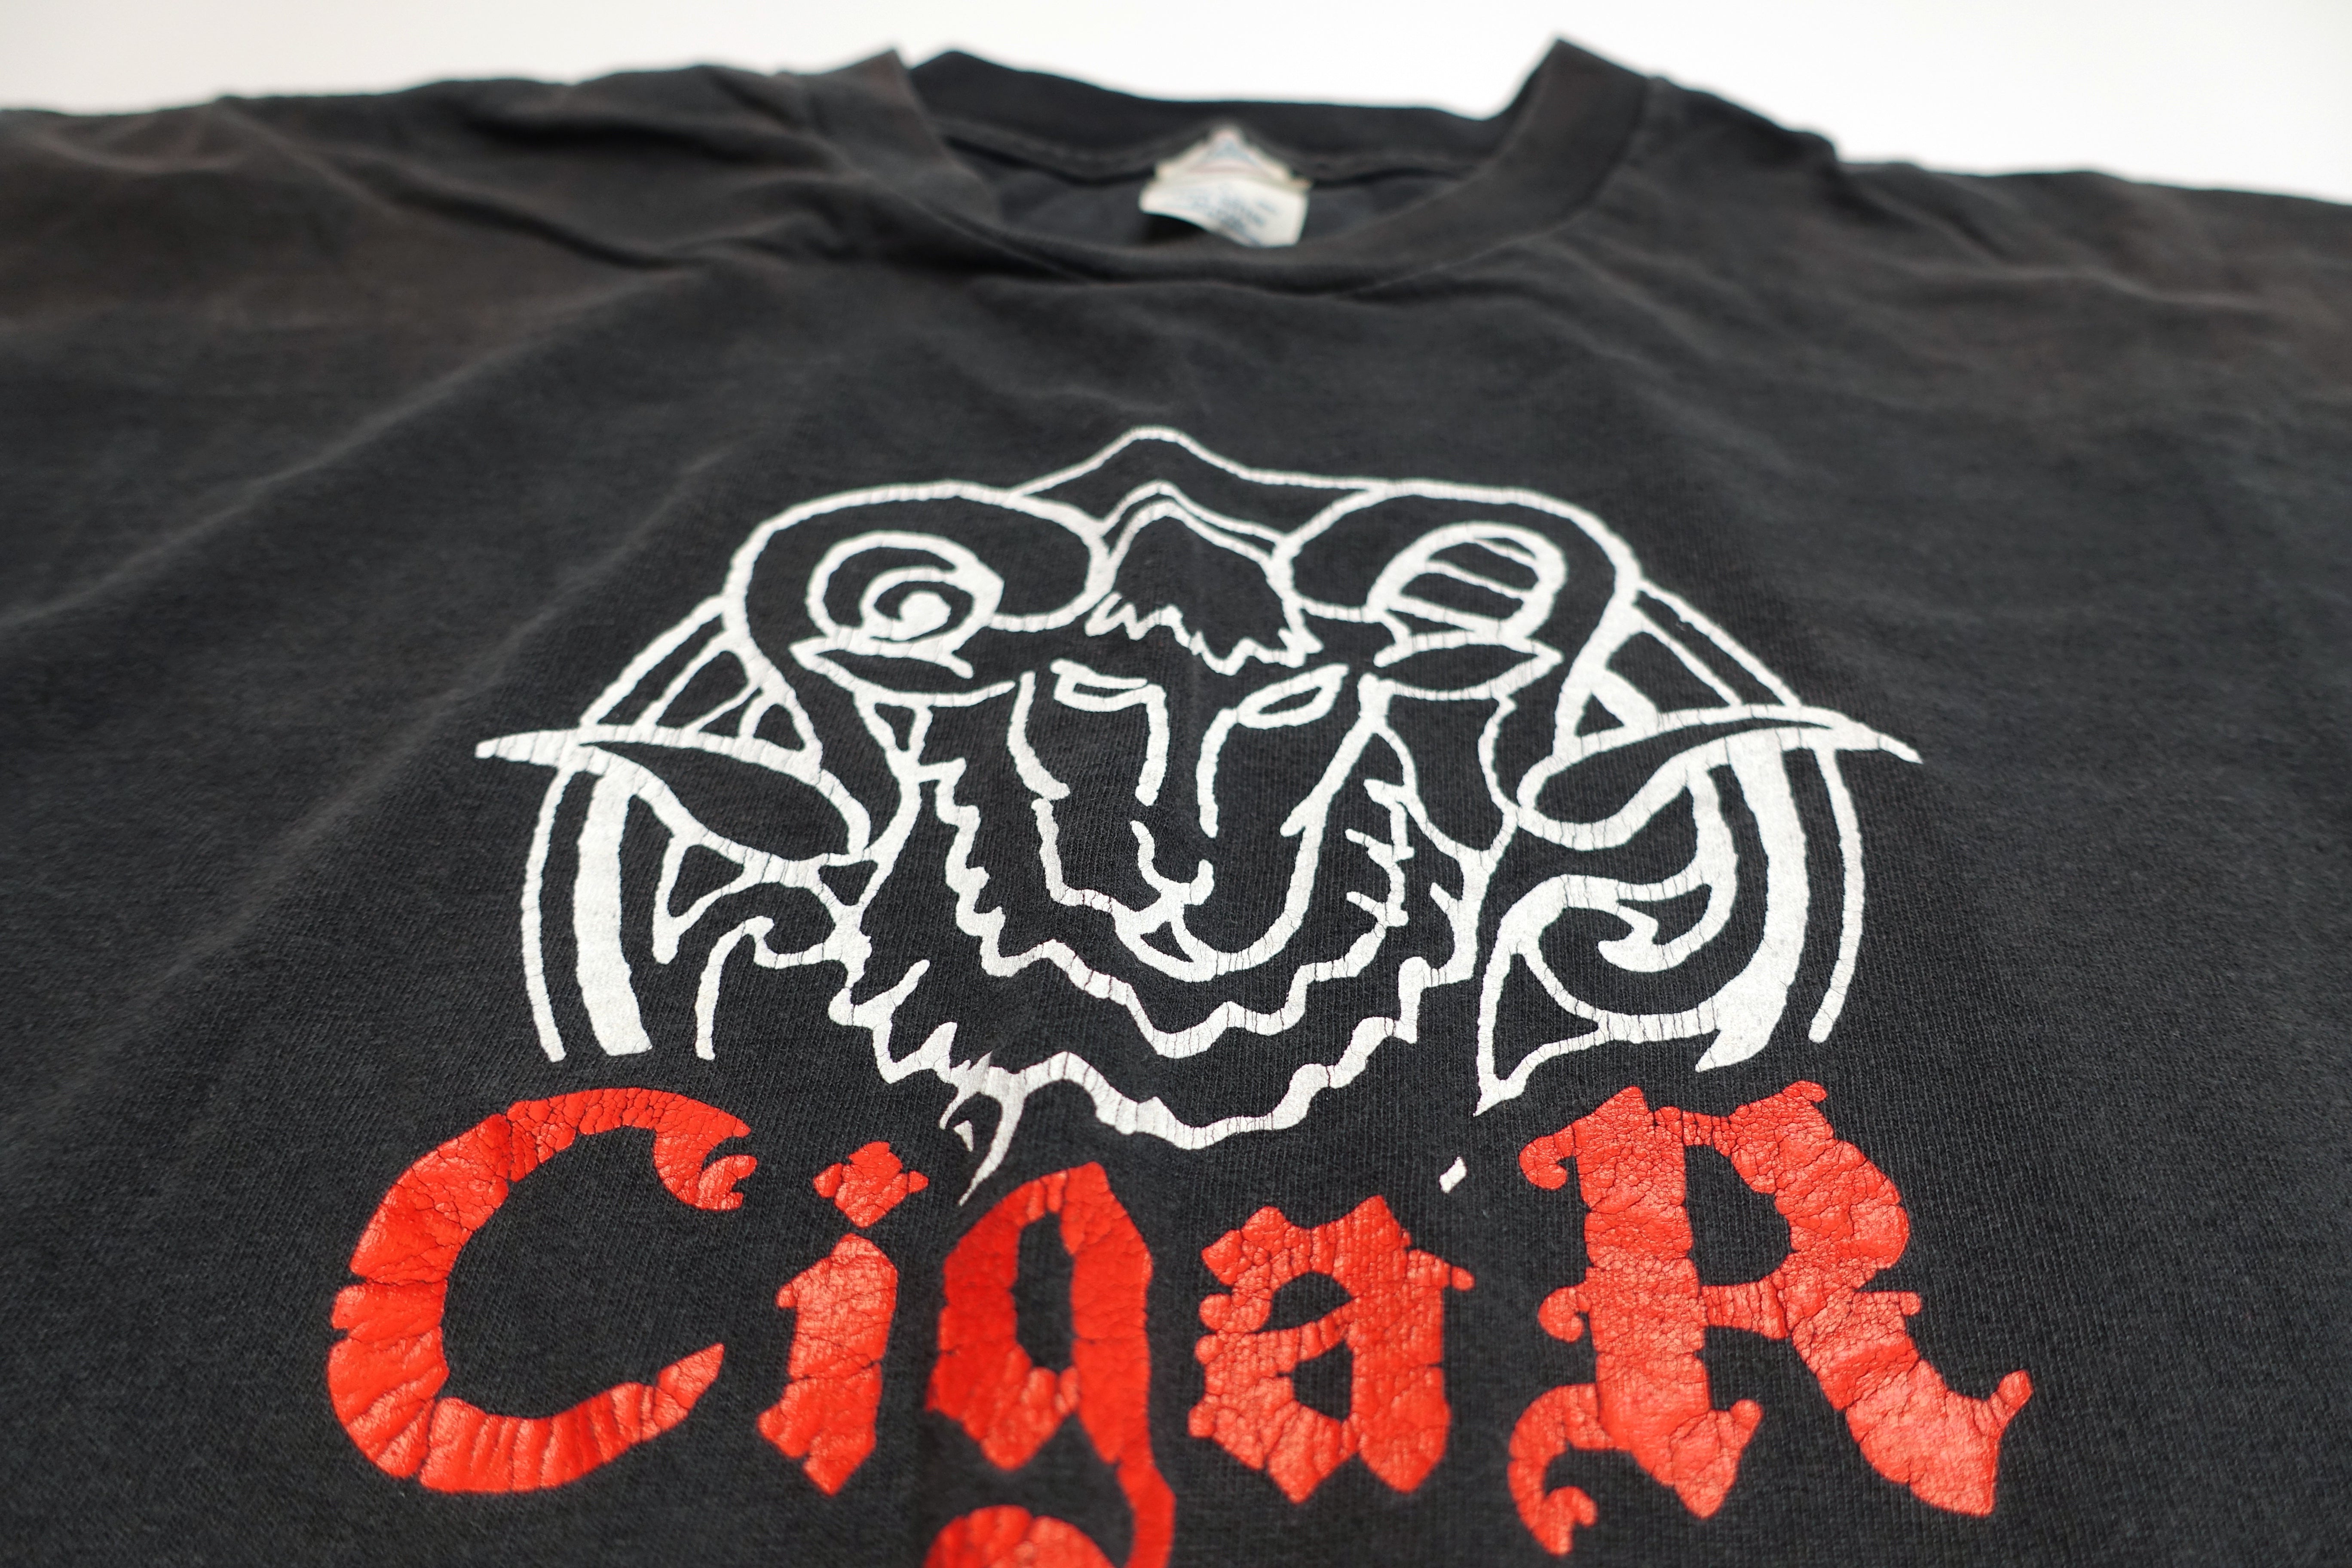 Cigar - Goat / Speed Is Relative 1999 Tour Shirt Size Large